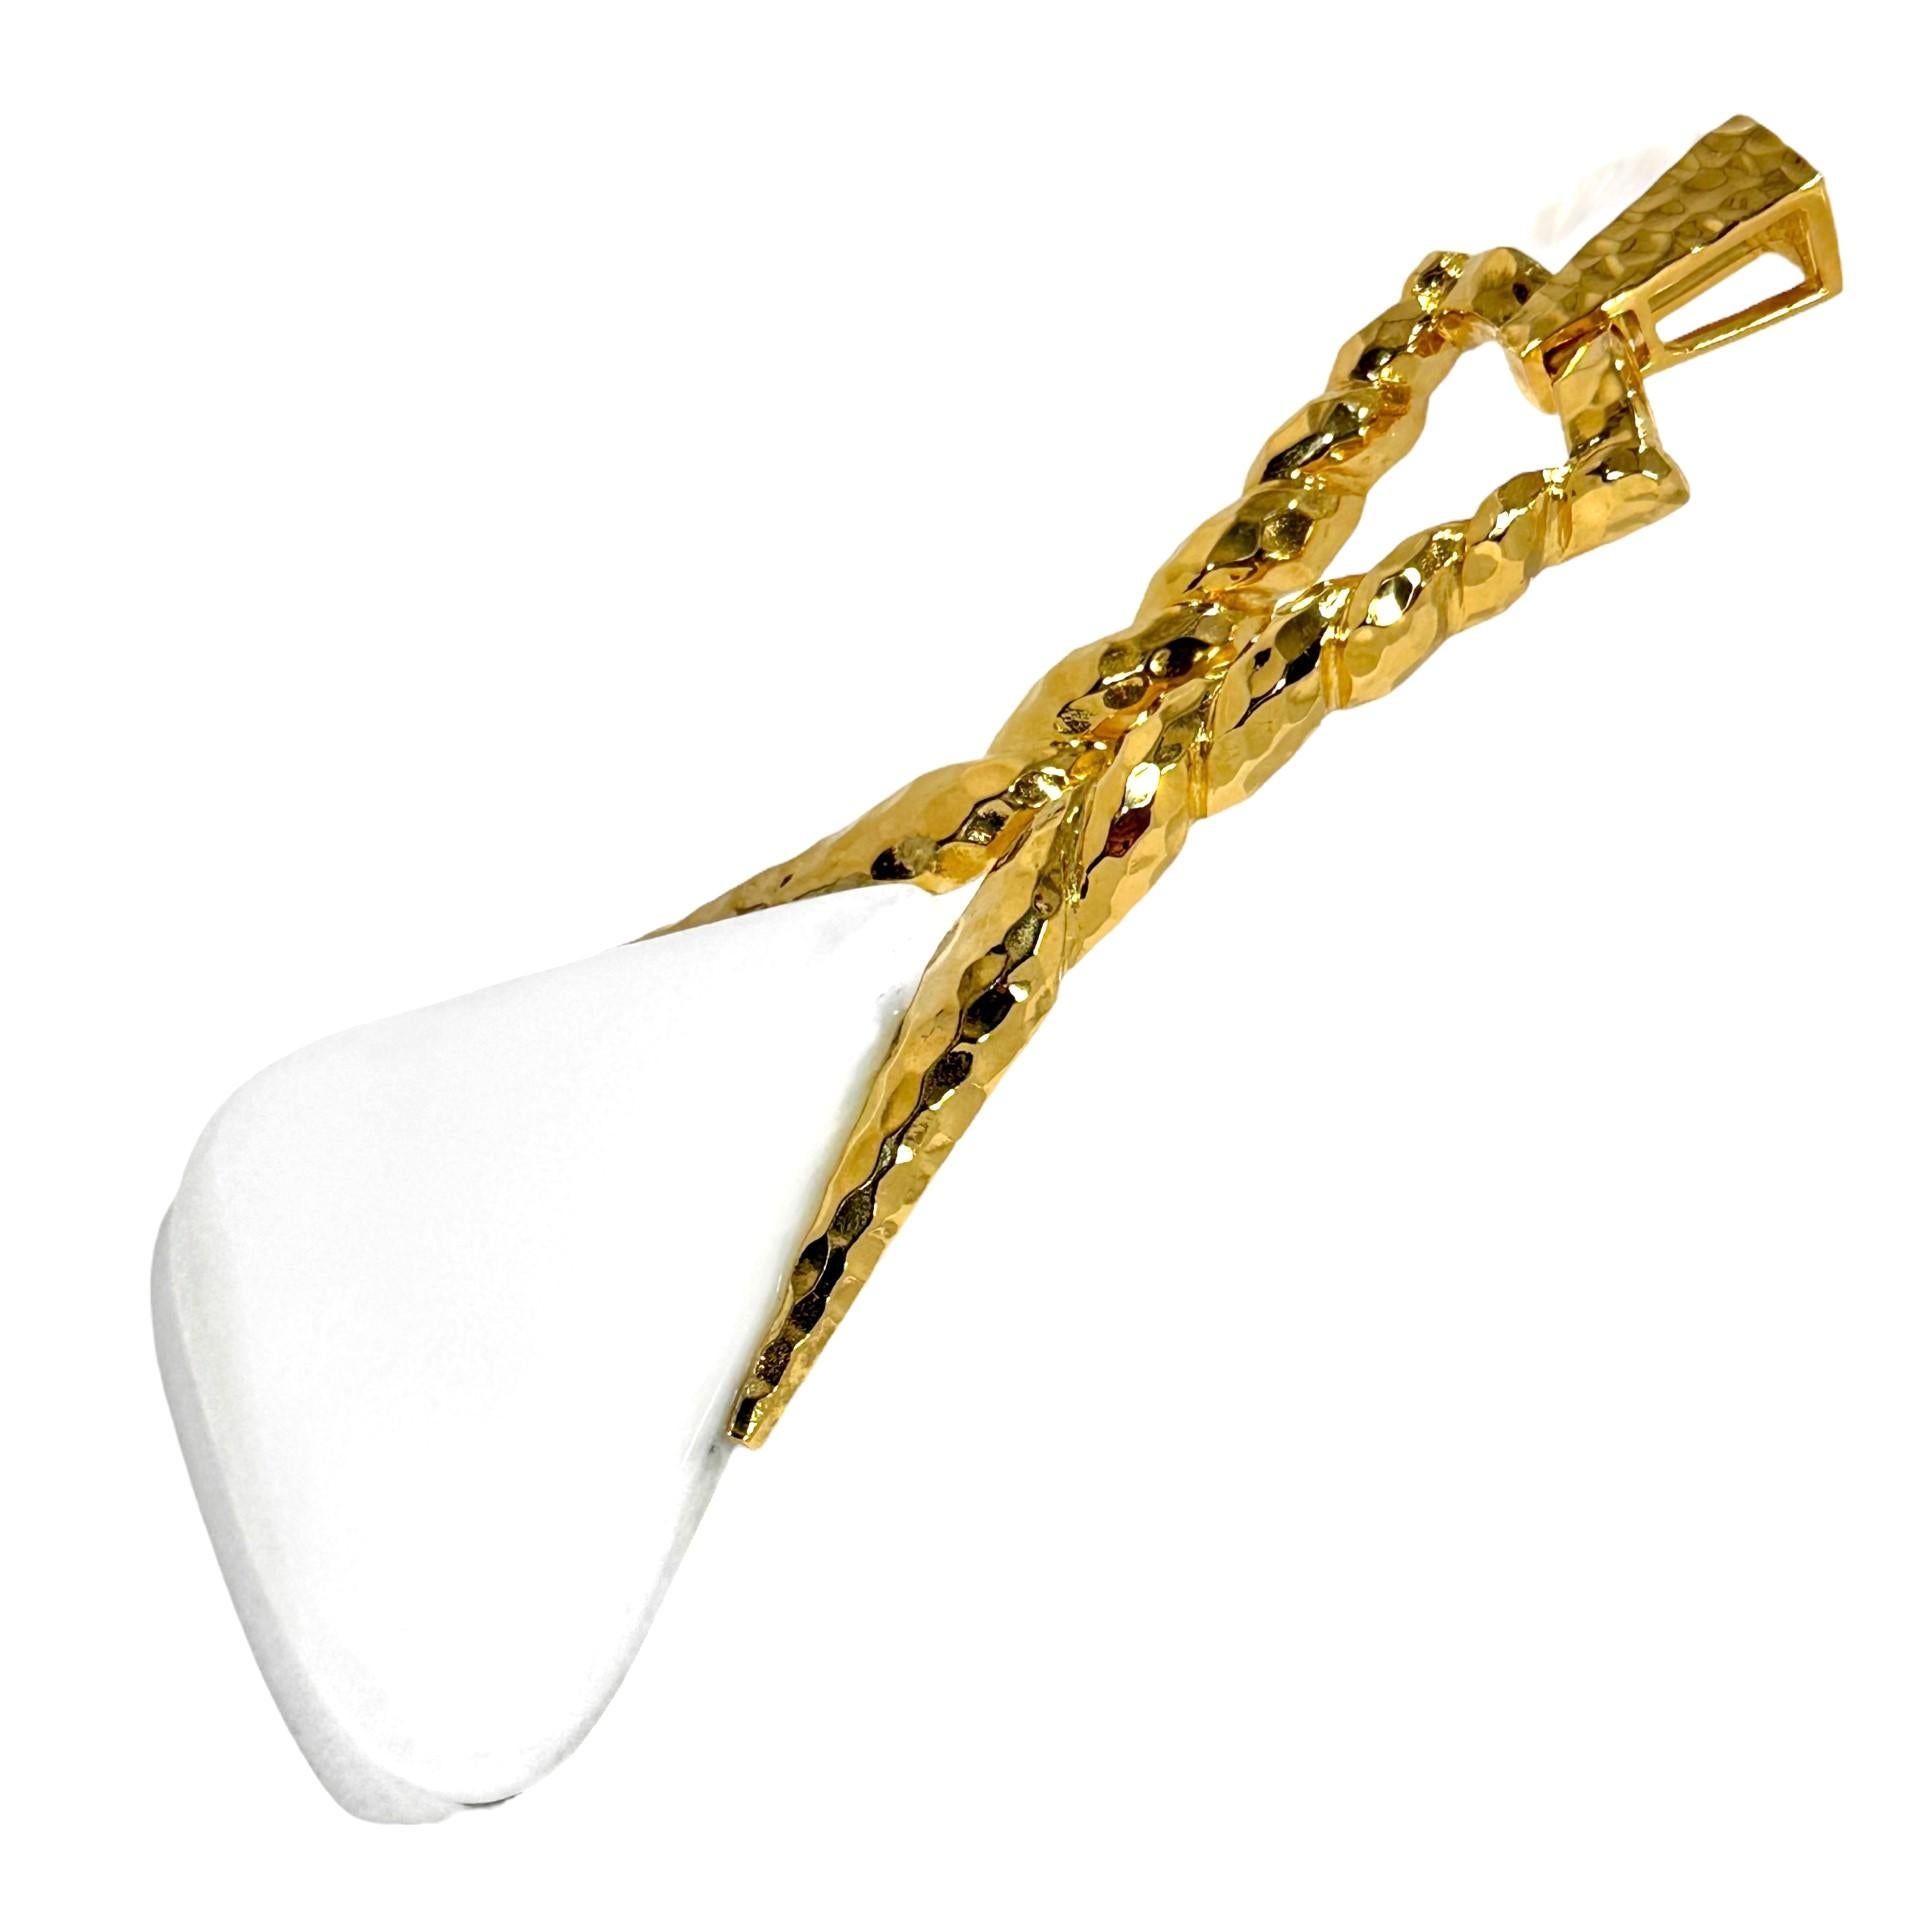 Large, French, Hammered Gold and White Onyx Pendant 4 3/8 Inches Long by Wander In Good Condition For Sale In Palm Beach, FL